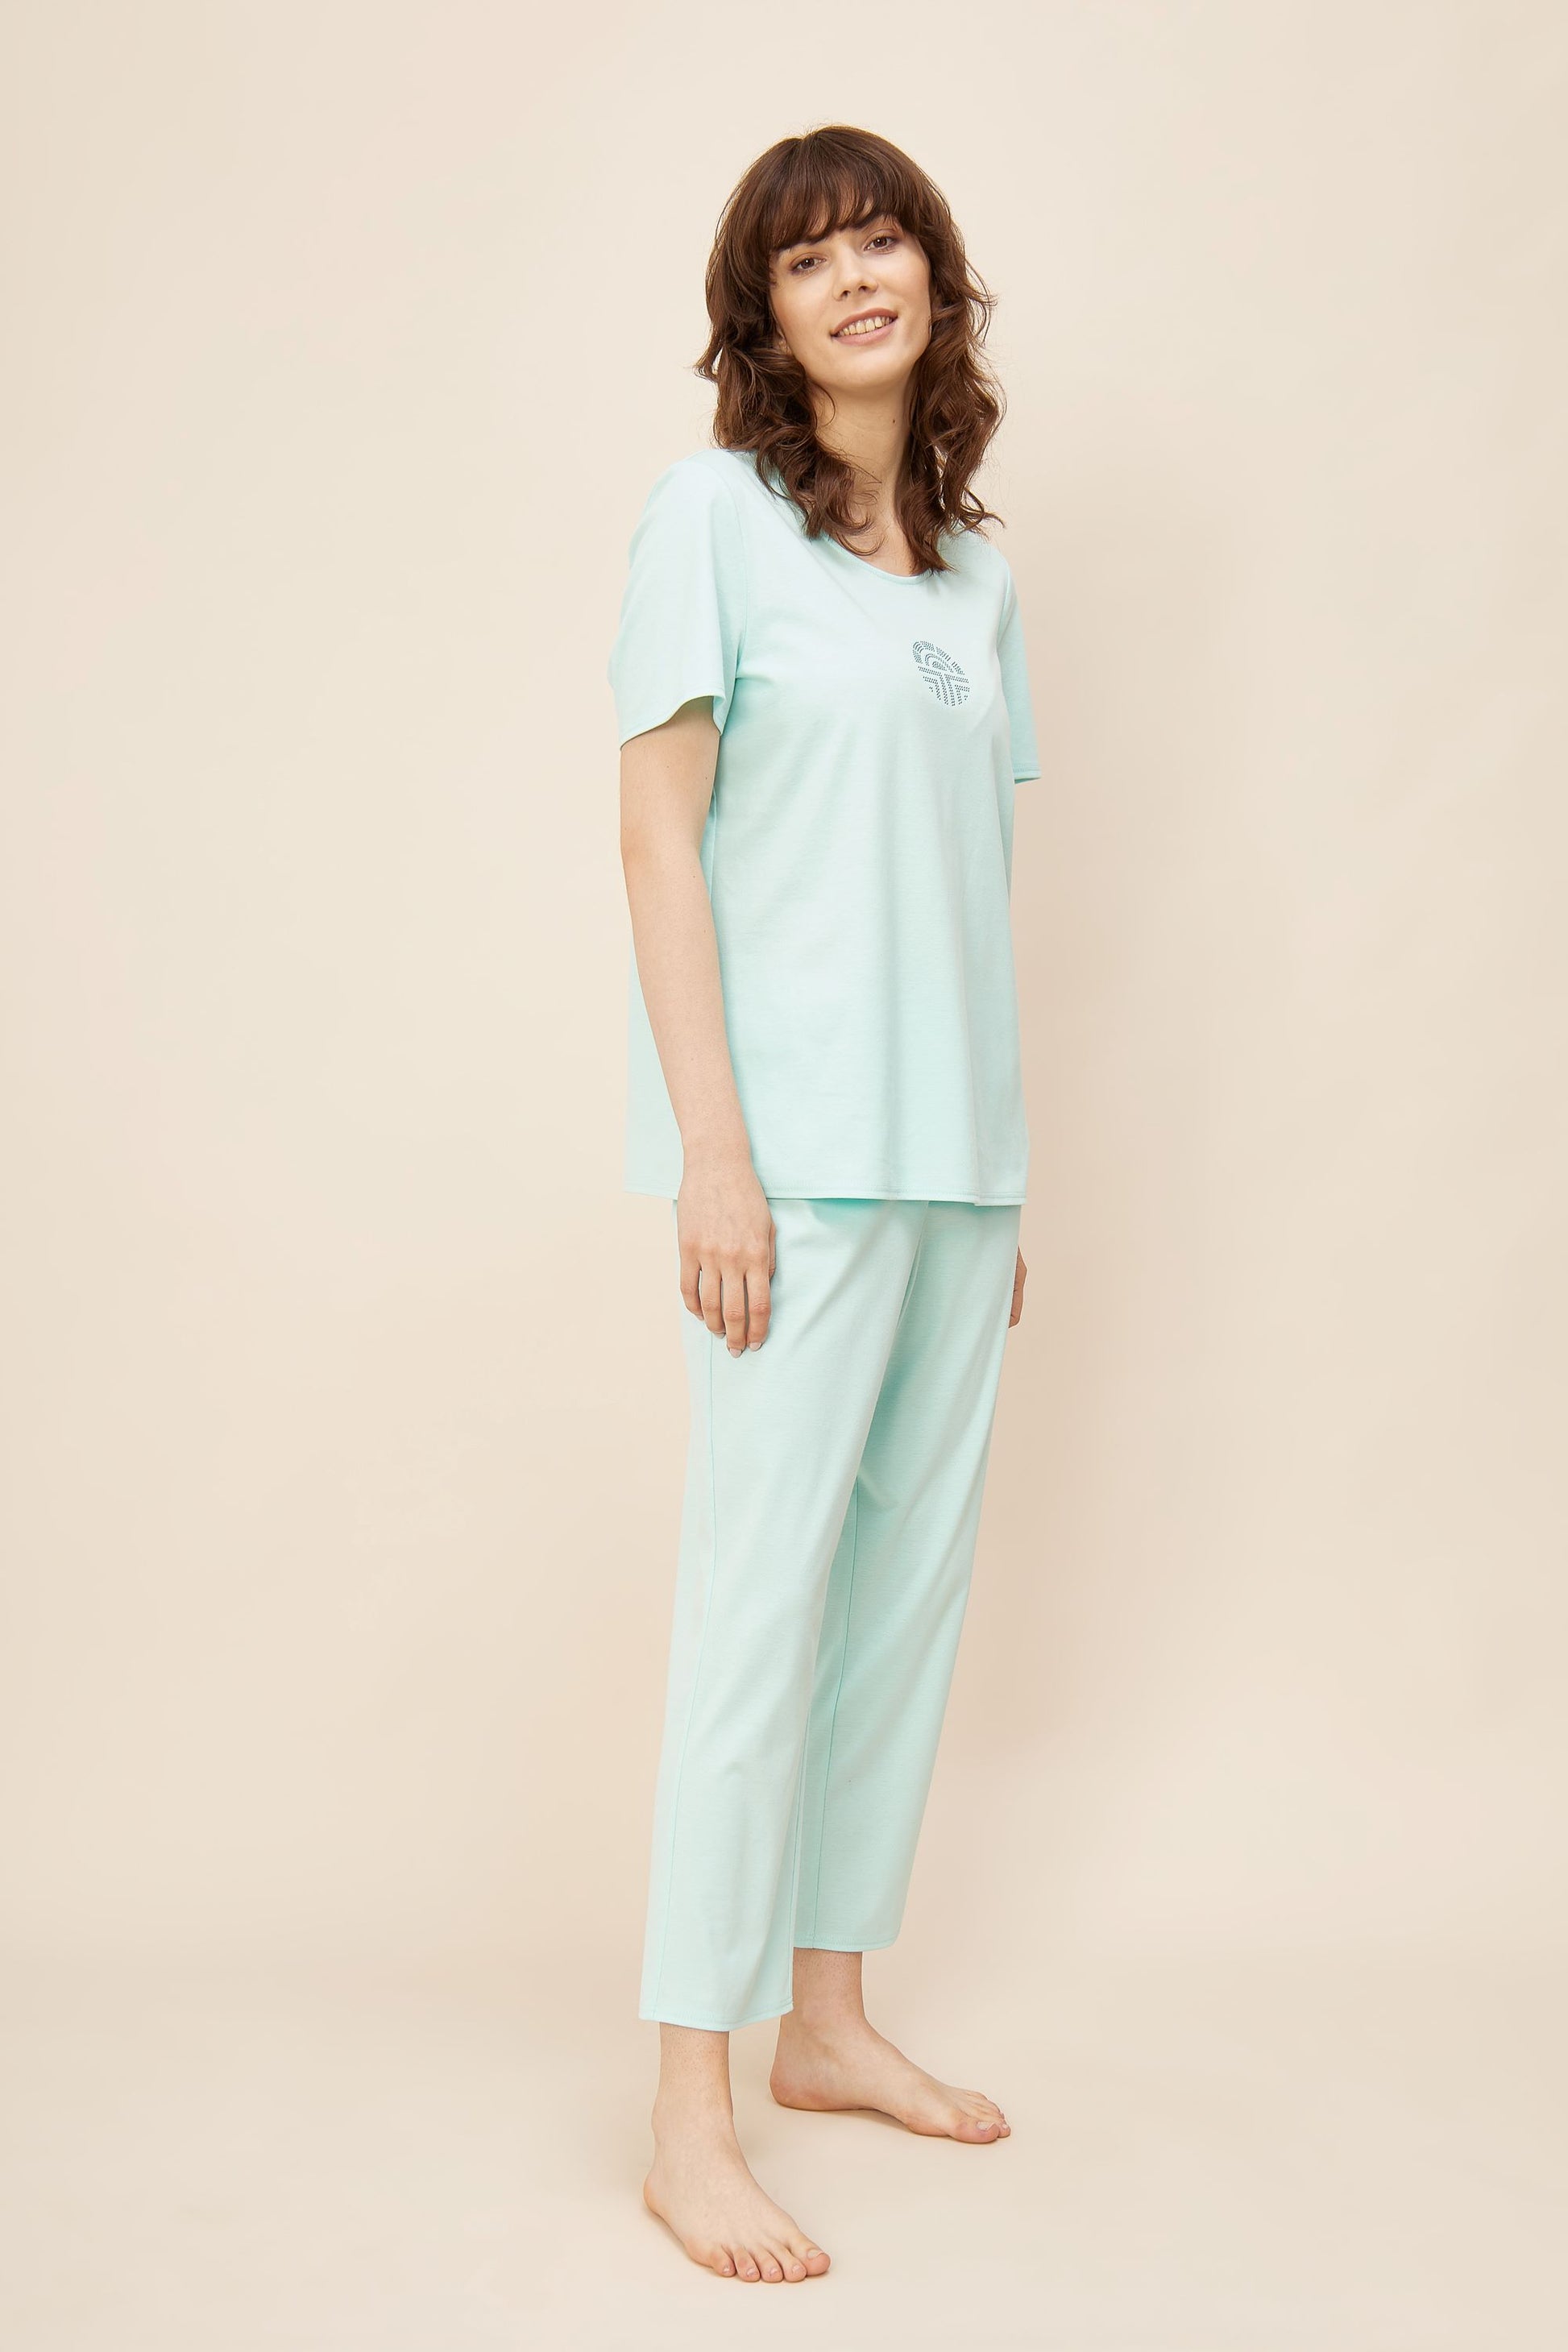 Féraud Paris' High Class line introduces this capri pajama set, crafted from 100% fine interlock cotton and adorned with Féraud logo accents on the top. 